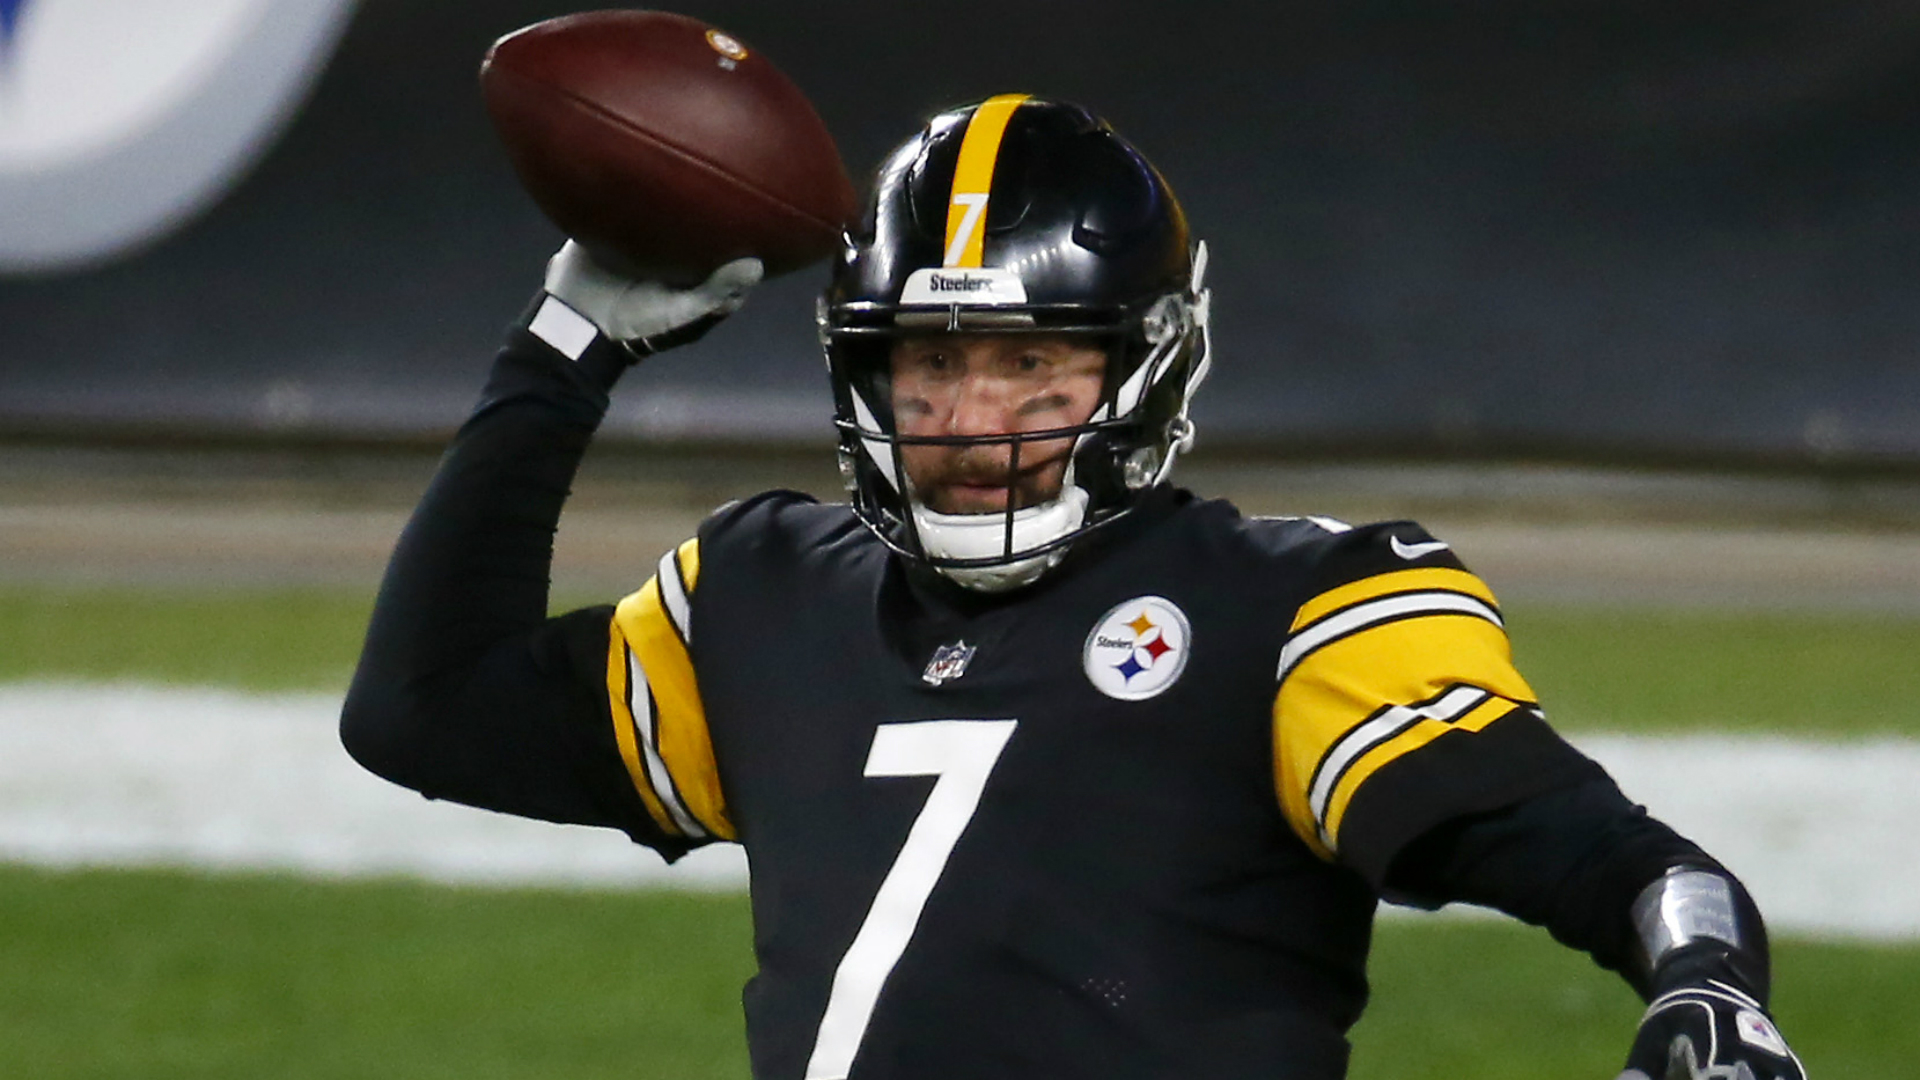 Art Rooney II confirmed talks will happen with Ben Roethlisberger over extending the veteran quarterback's stay at the Pittsburgh Steelers.